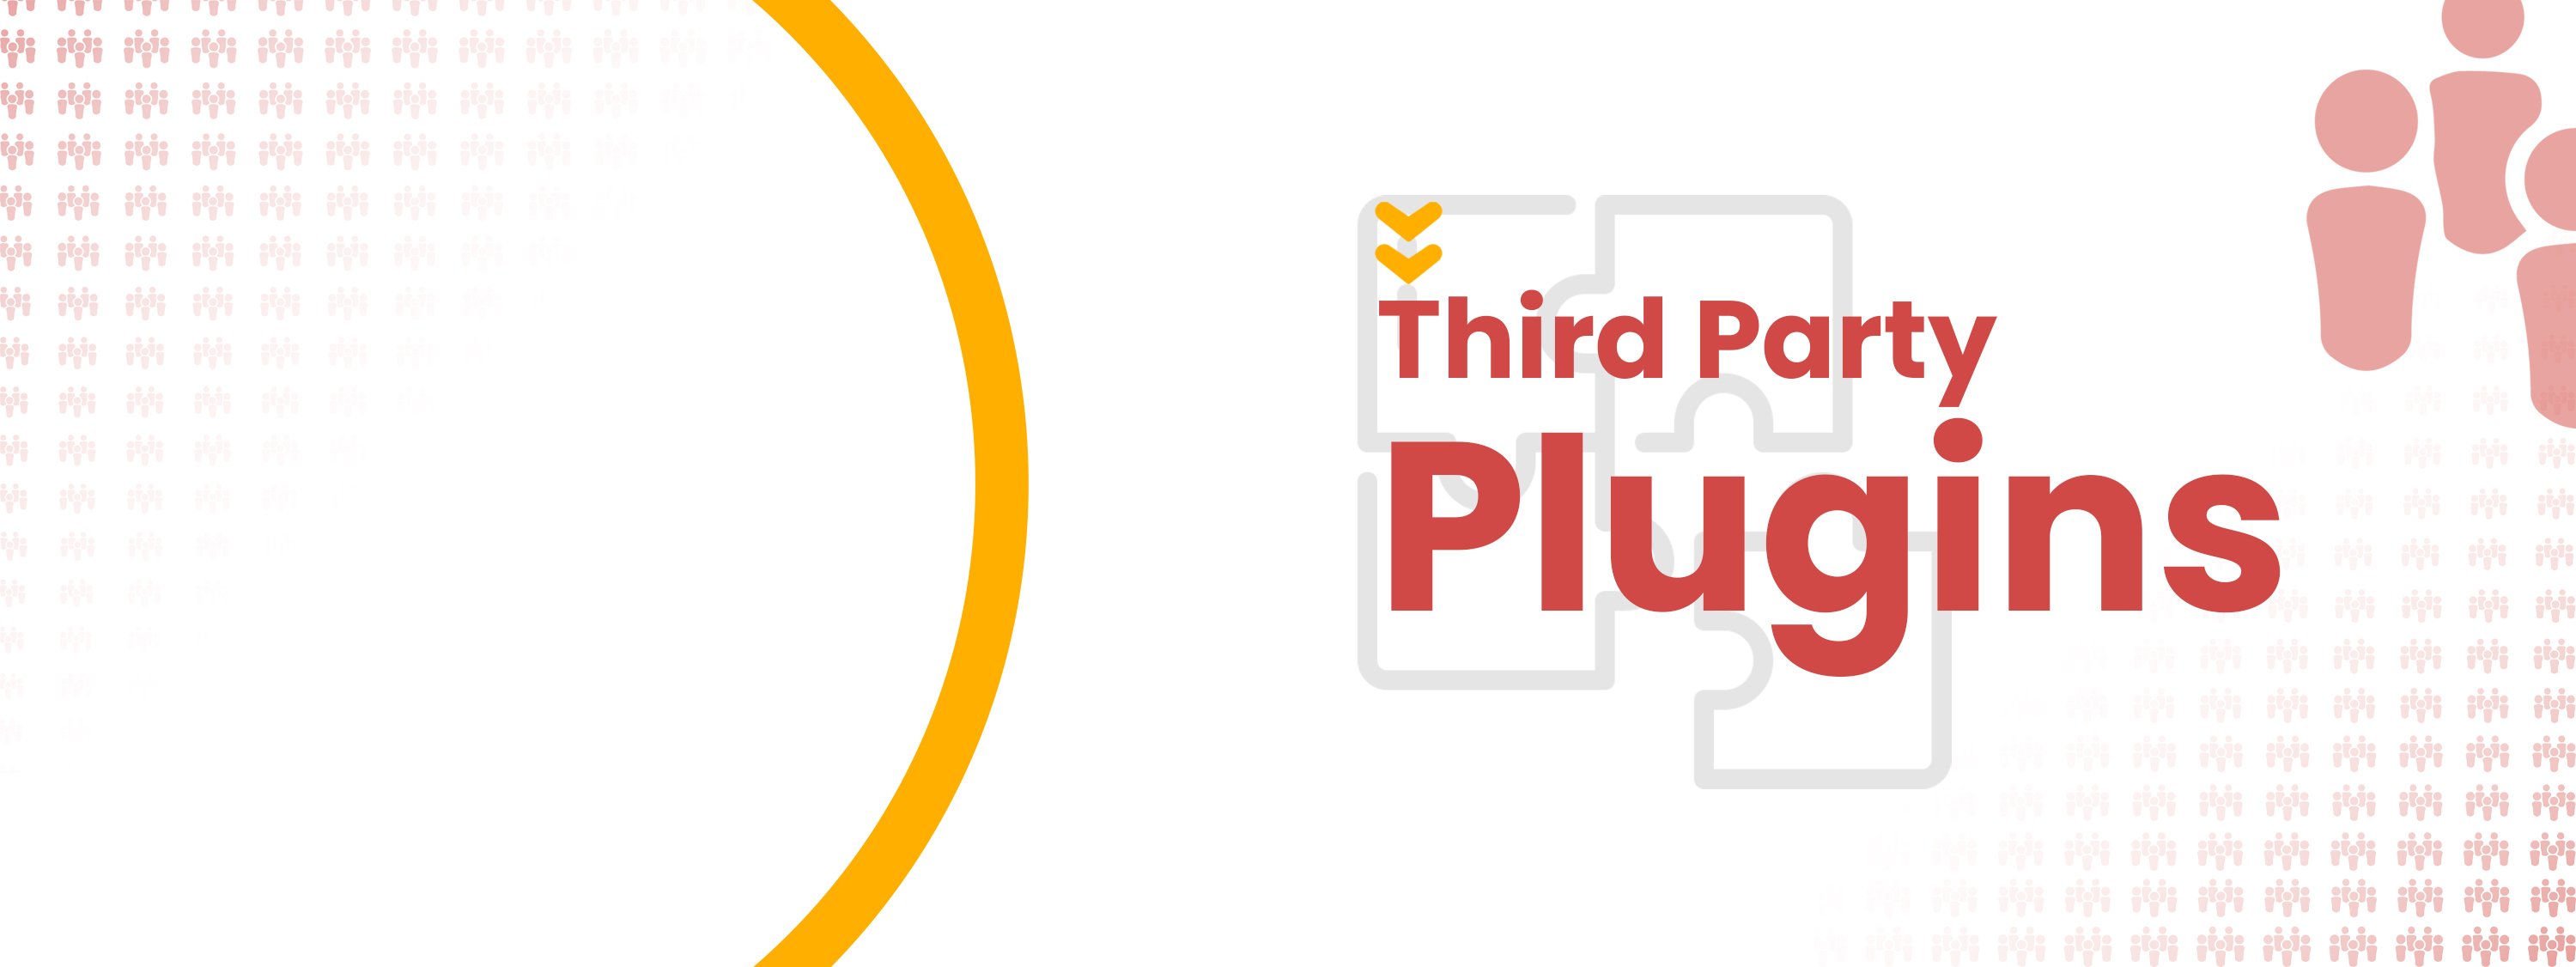 Third Party Plugins cover photo